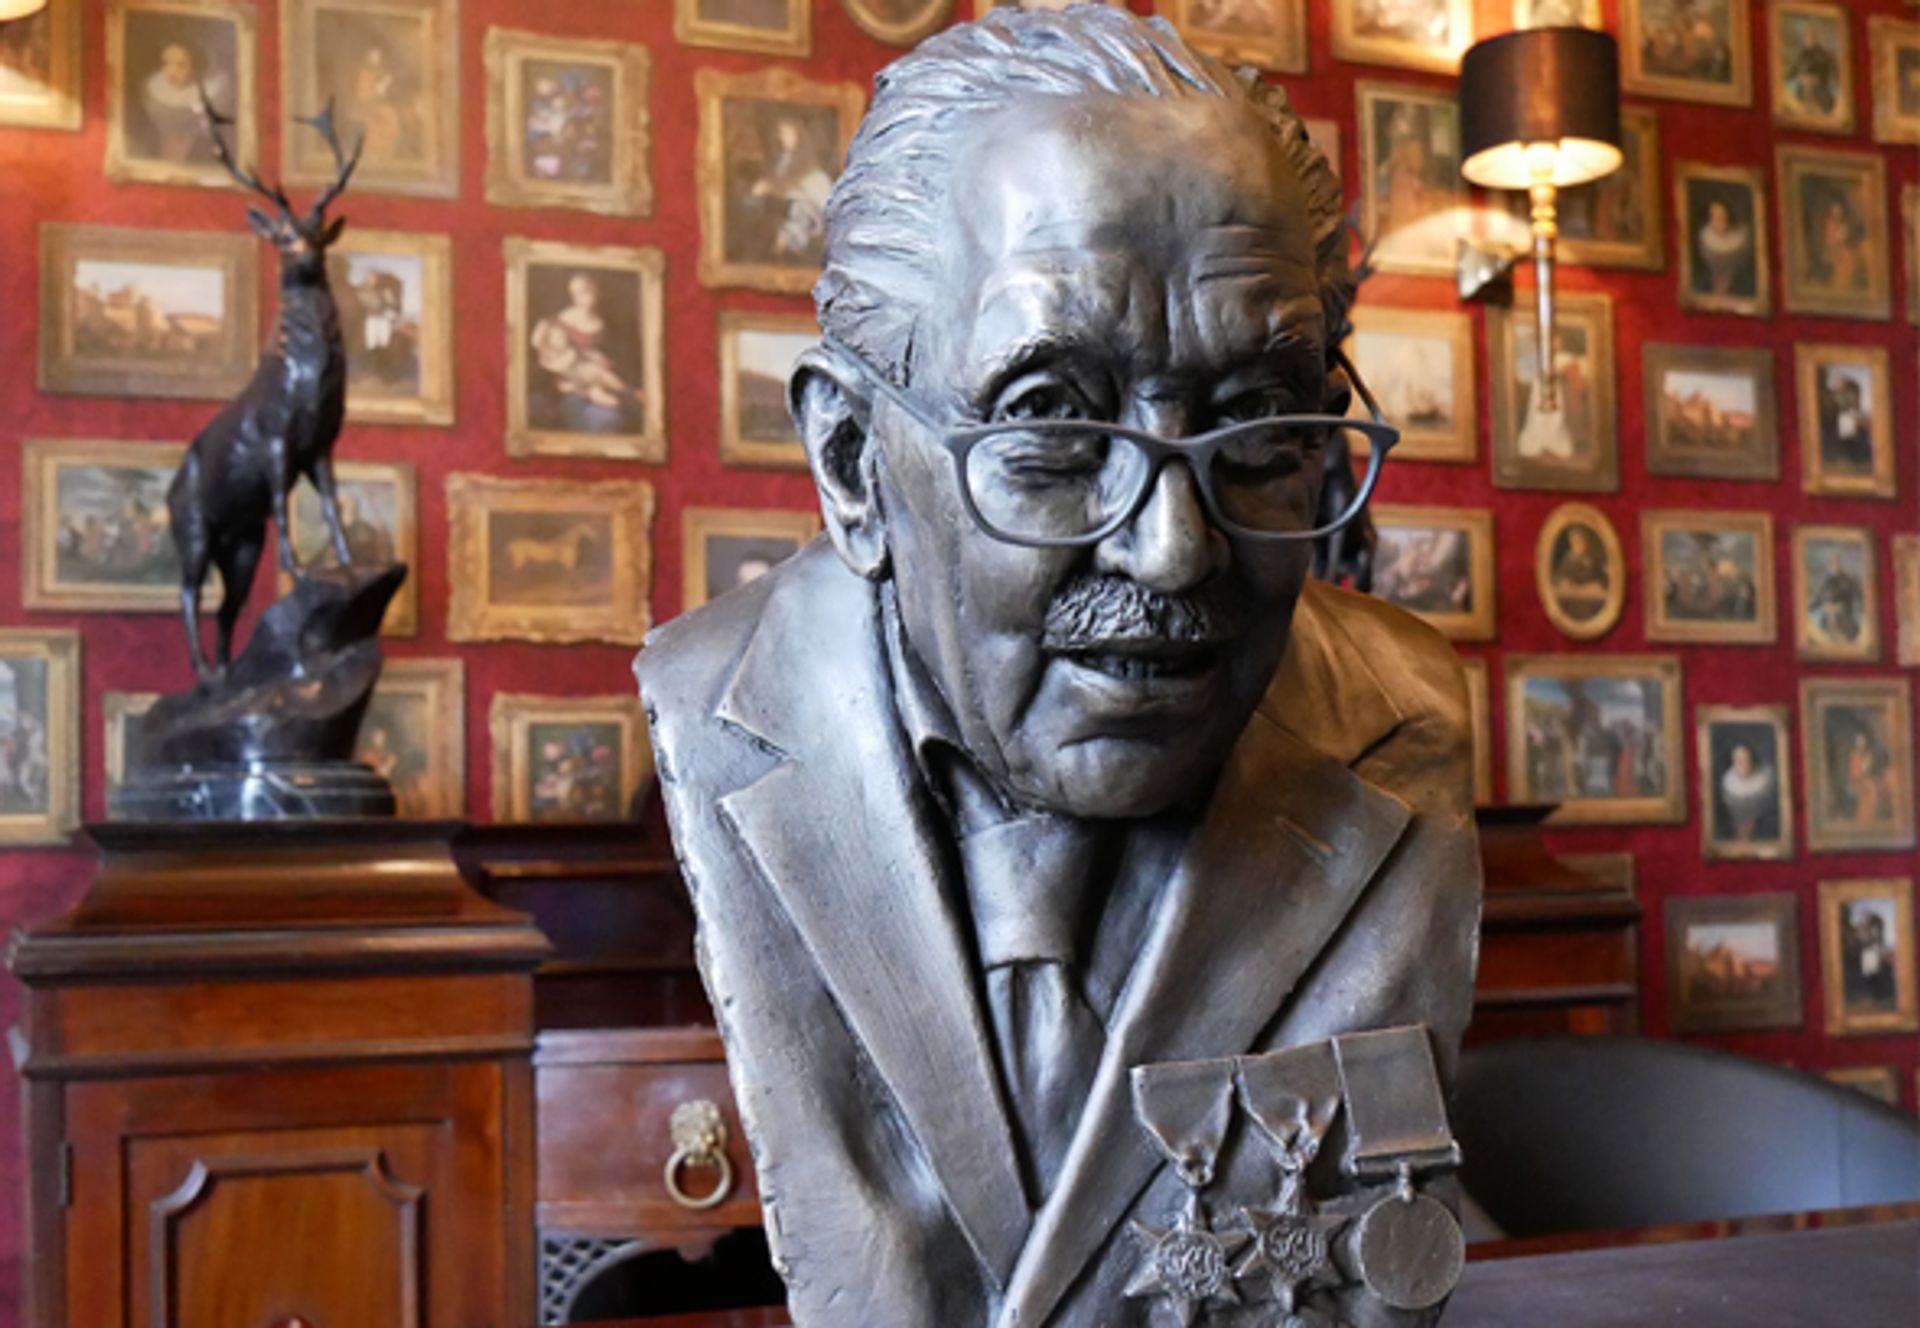 The bust of Captain Sir Tom Moore produced by Monumental Icons courtesy Monumental Icons